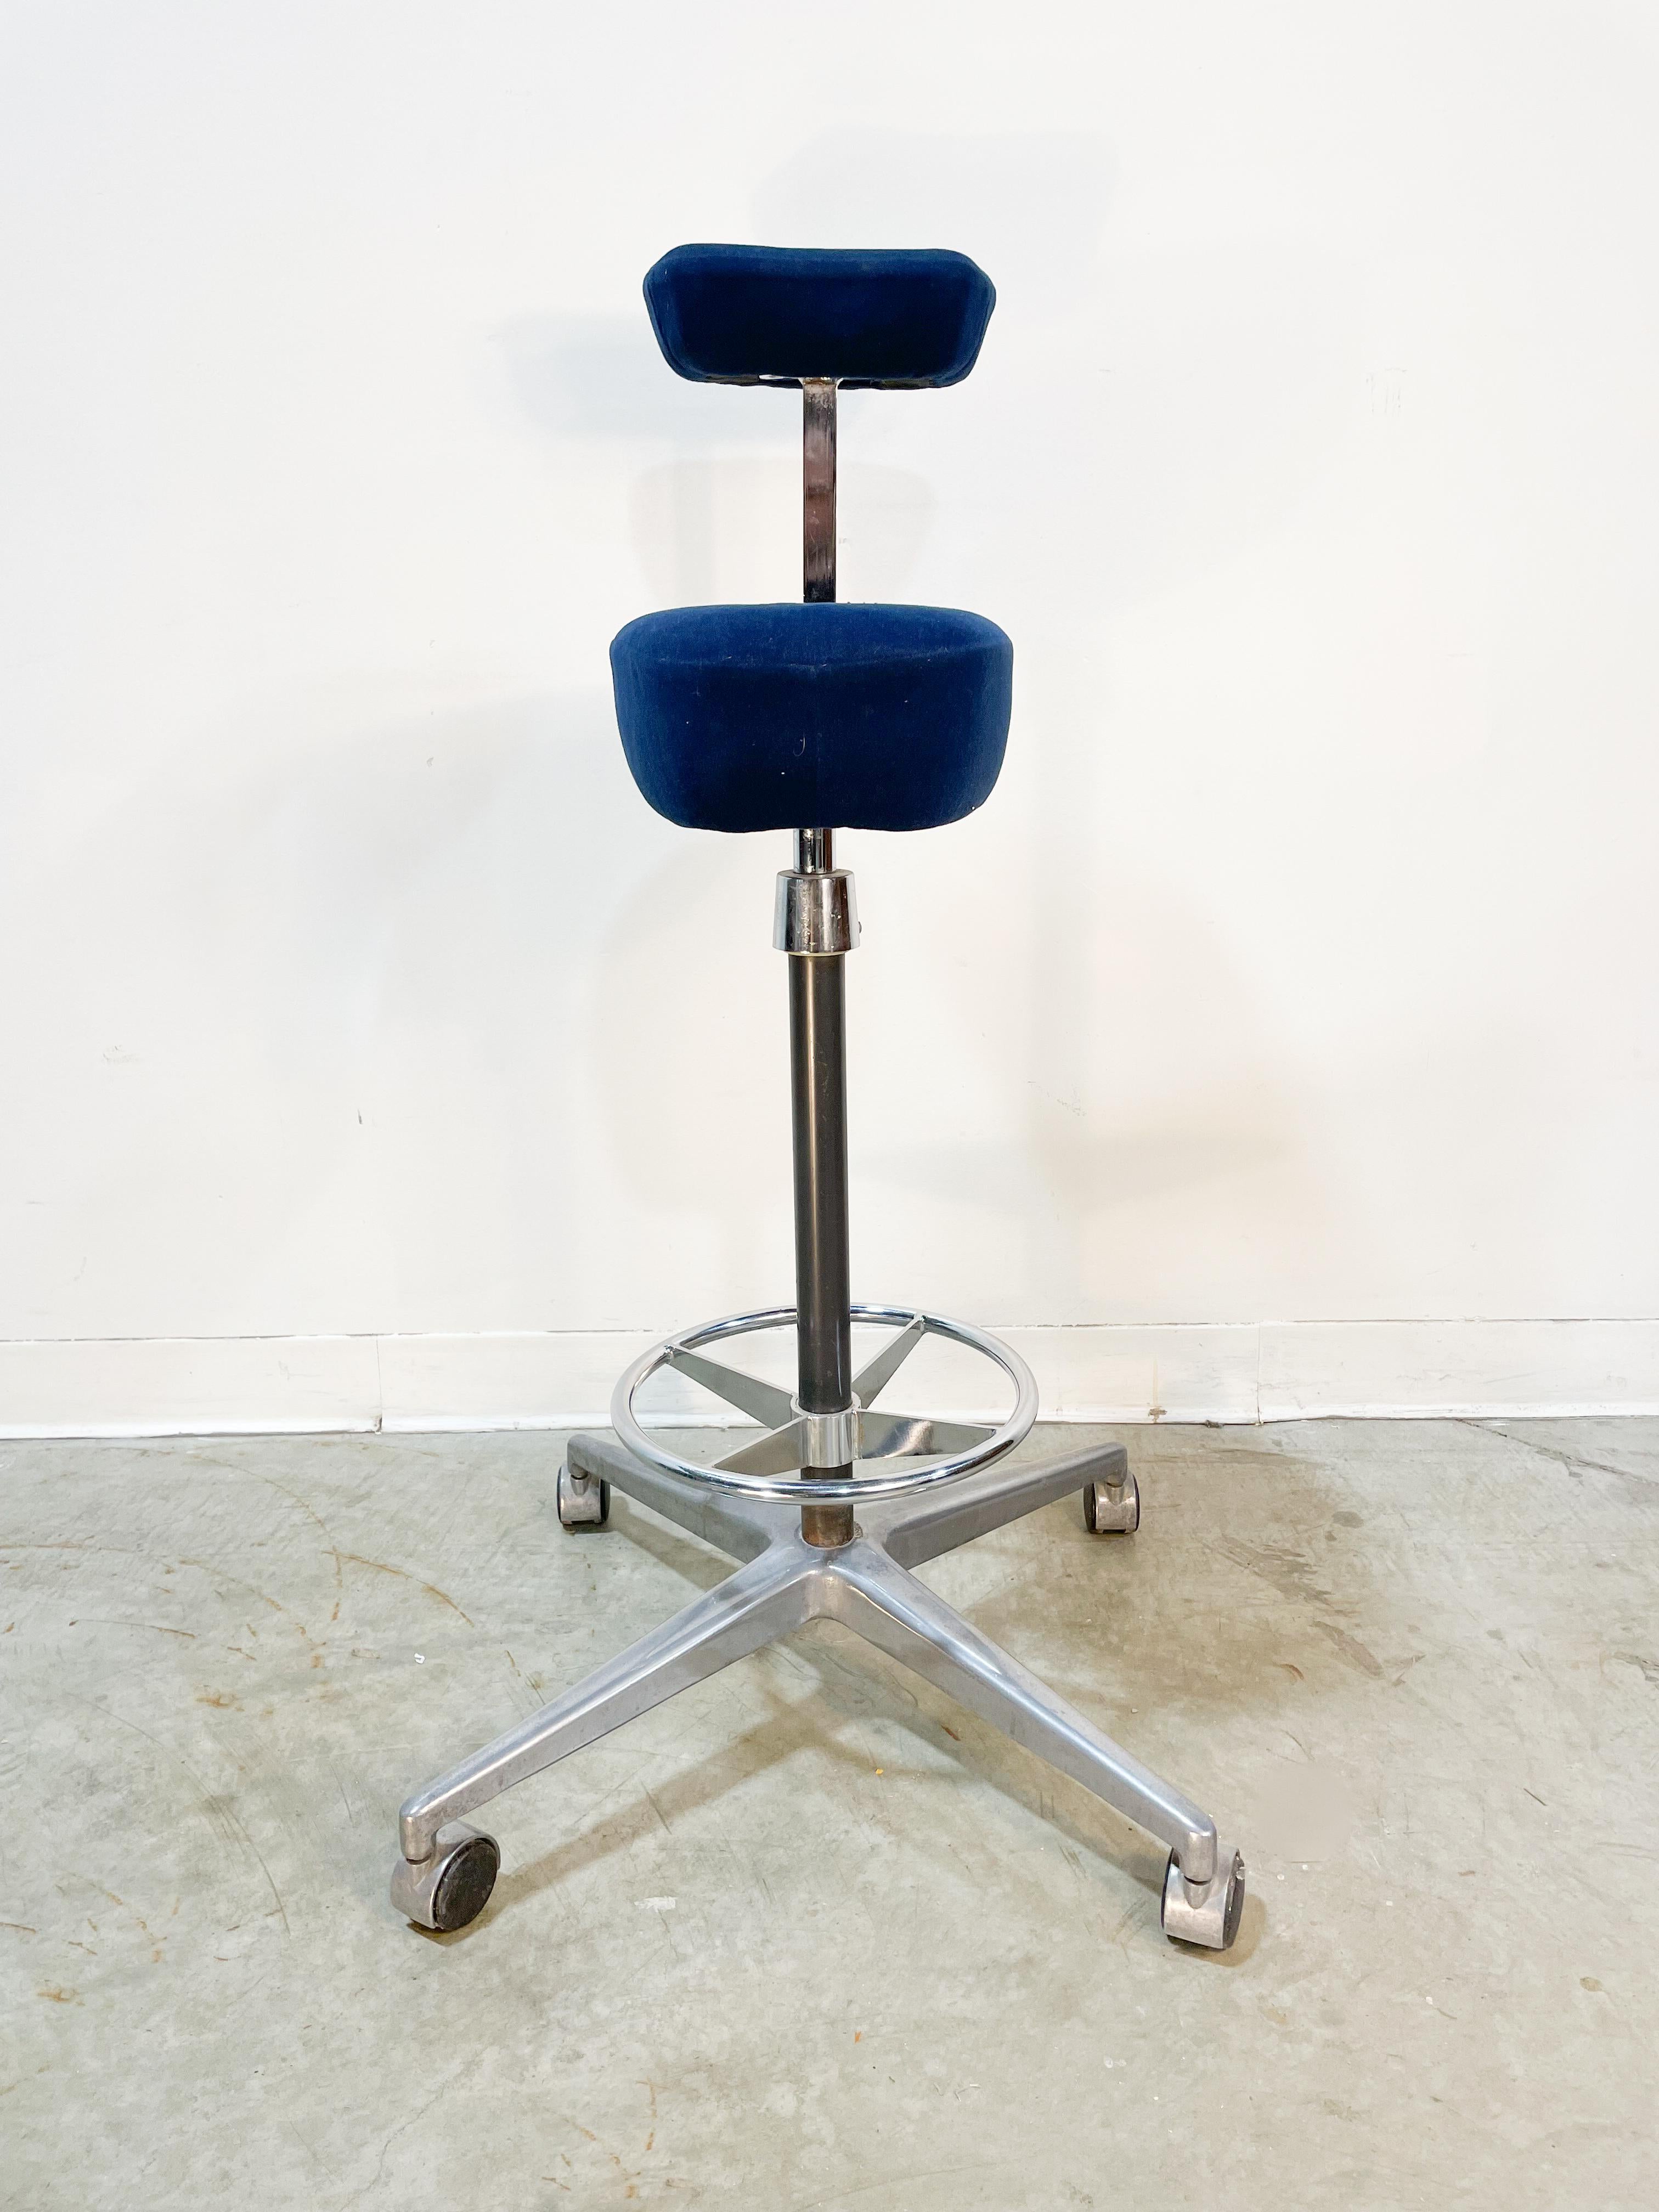 Classic George Nelson / Robert Probst design was introduced in 1964 as part of Herman Miller's Action Office series. Unique slimline seat and armrest allow for multiple seating positions and versatile support. Original blue velvet-like fabric in